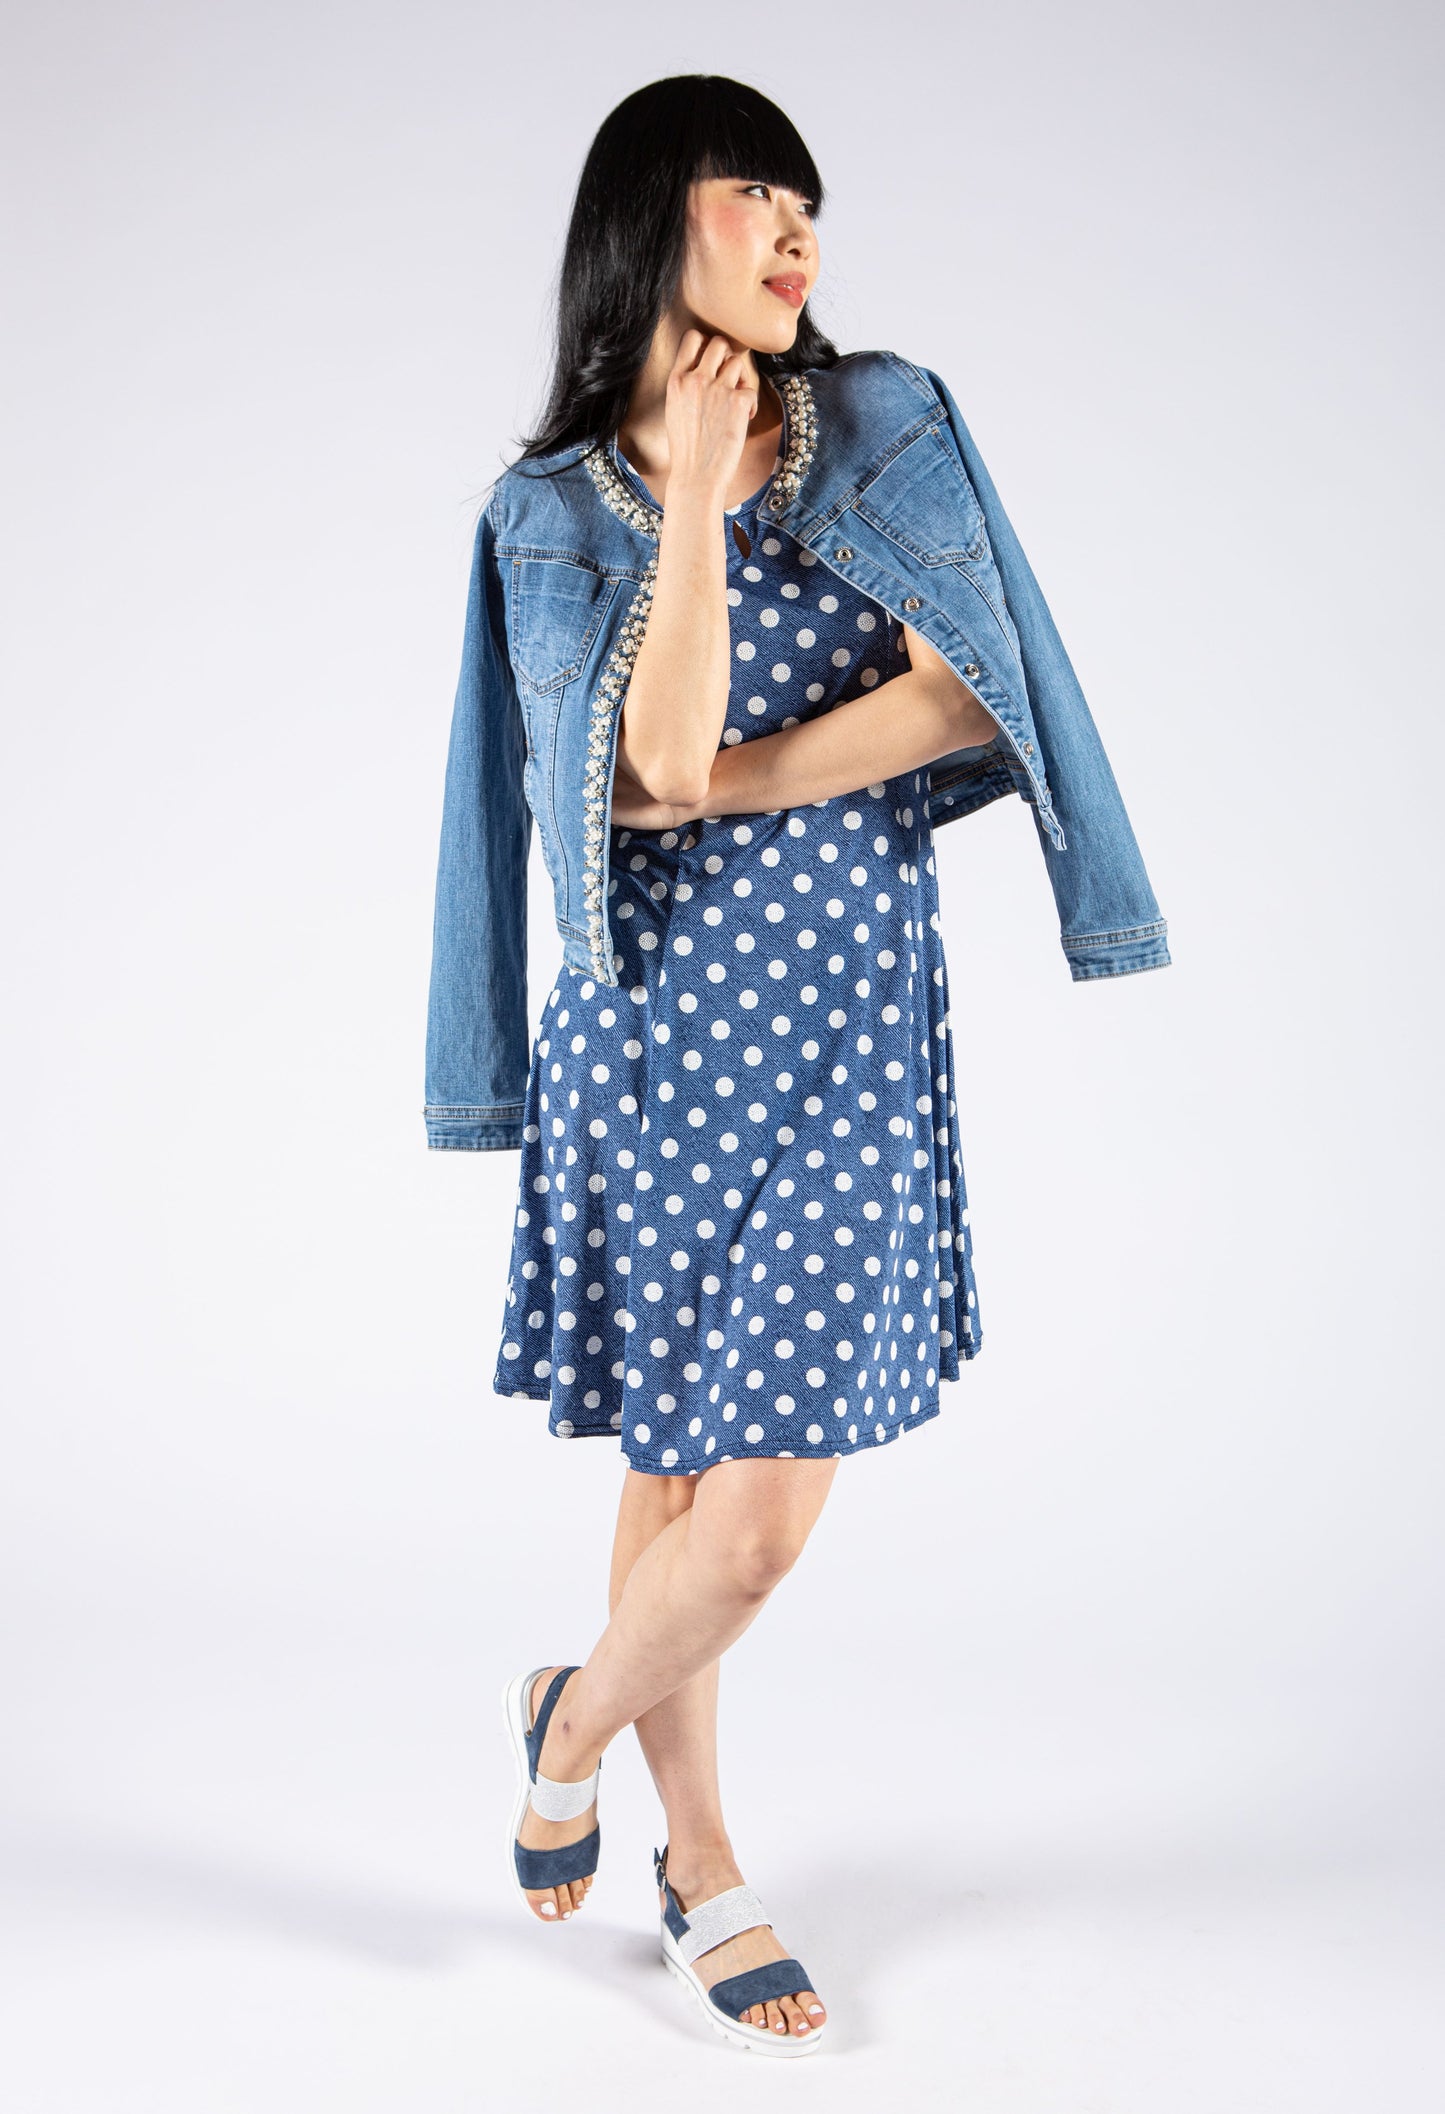 Polka Dot Fit and Flare Dress